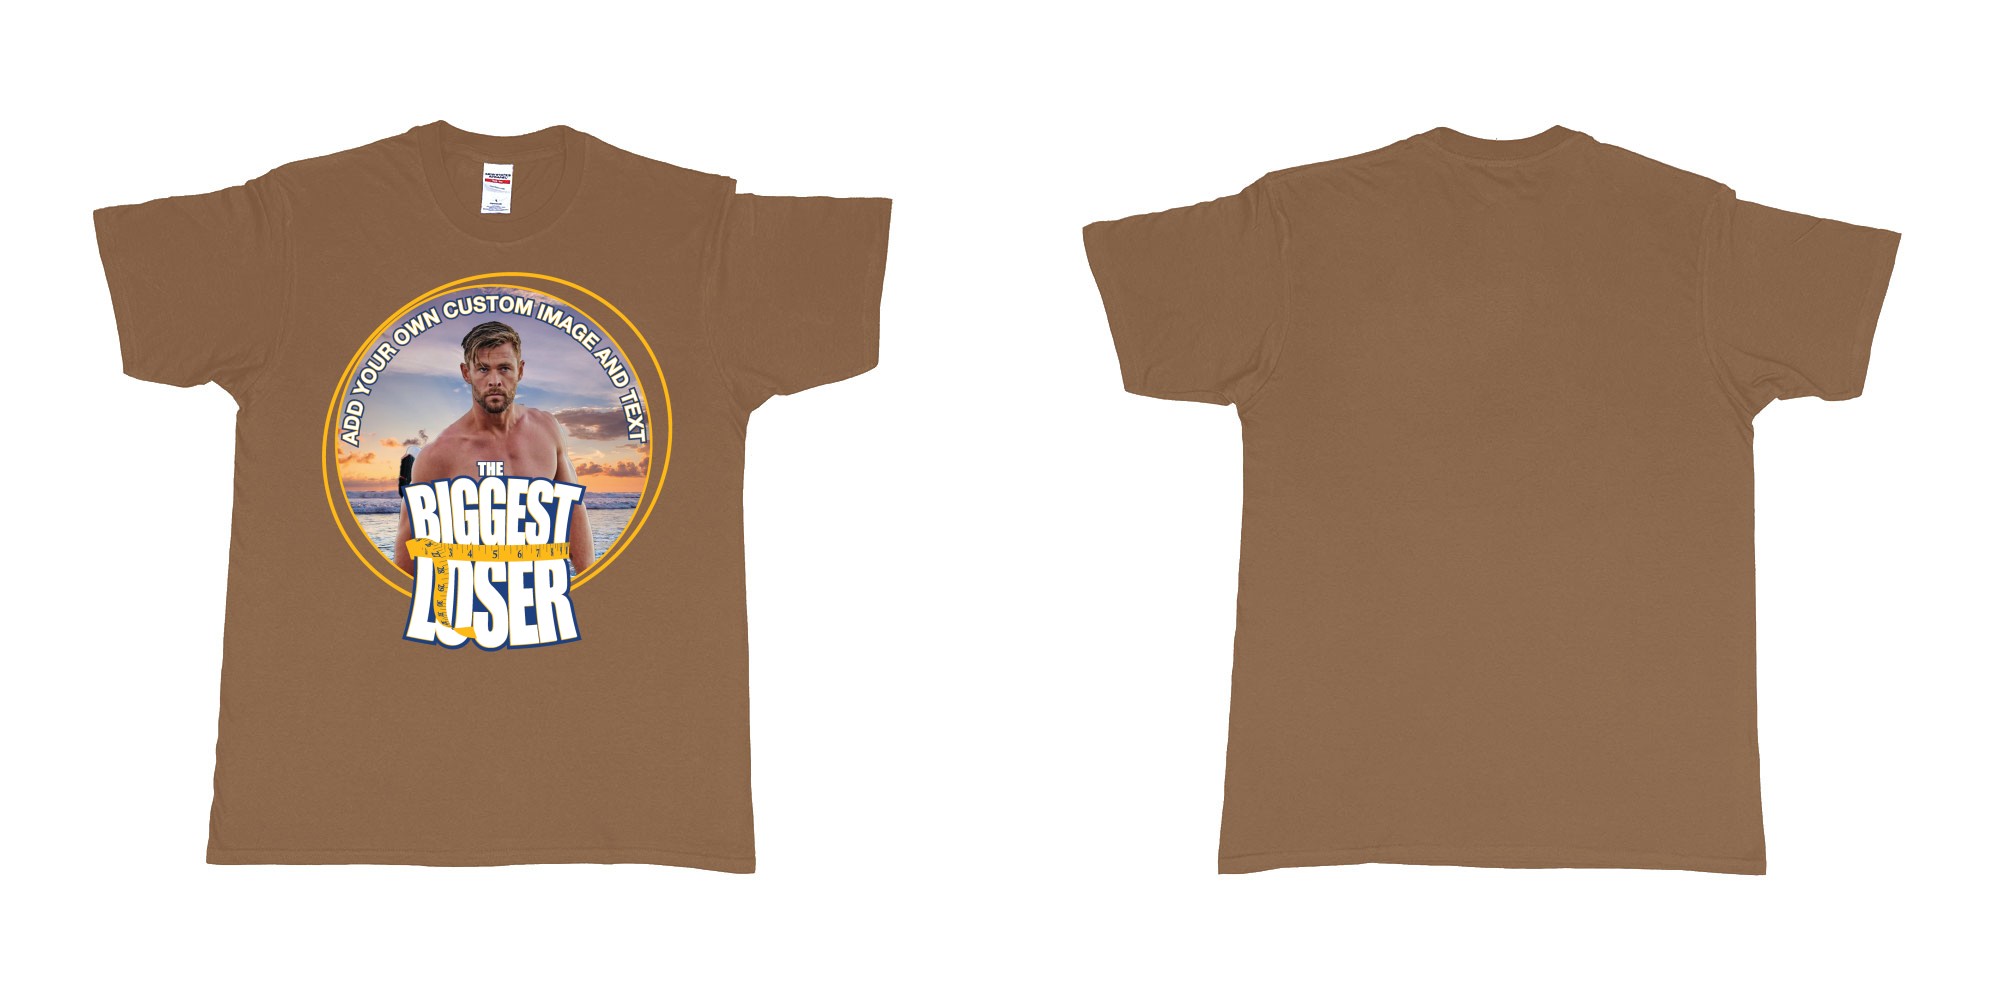 Custom tshirt design the biggest loser logo custom image funny tshirt design in fabric color chestnut choice your own text made in Bali by The Pirate Way